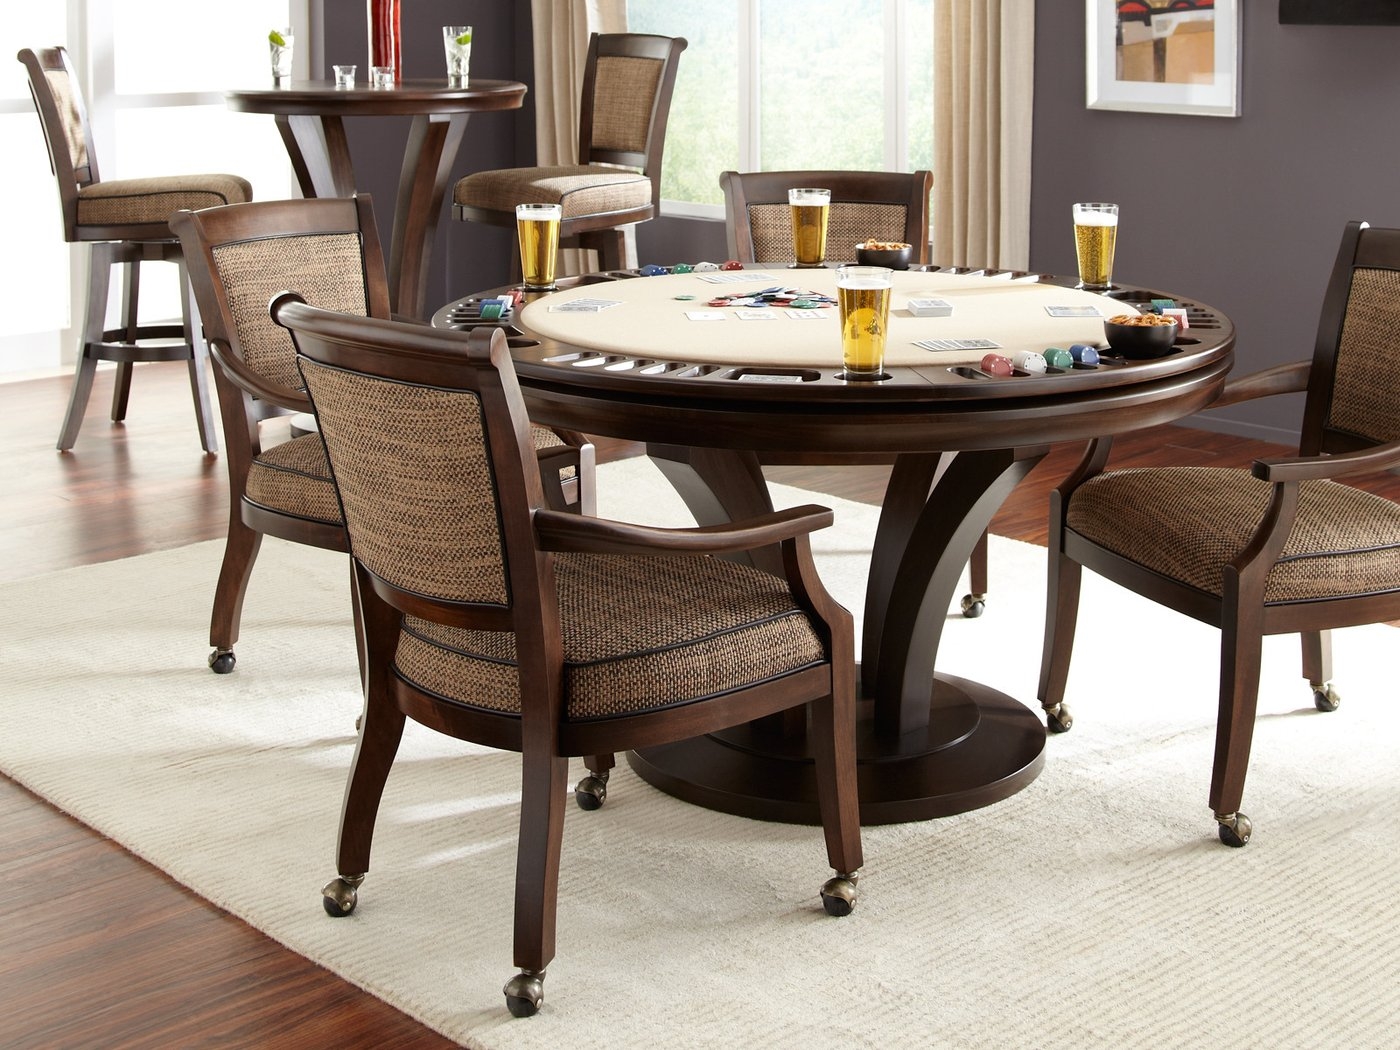 Dining Chairs With Casters You Ll Love, Fabric Dining Room Chairs With Casters